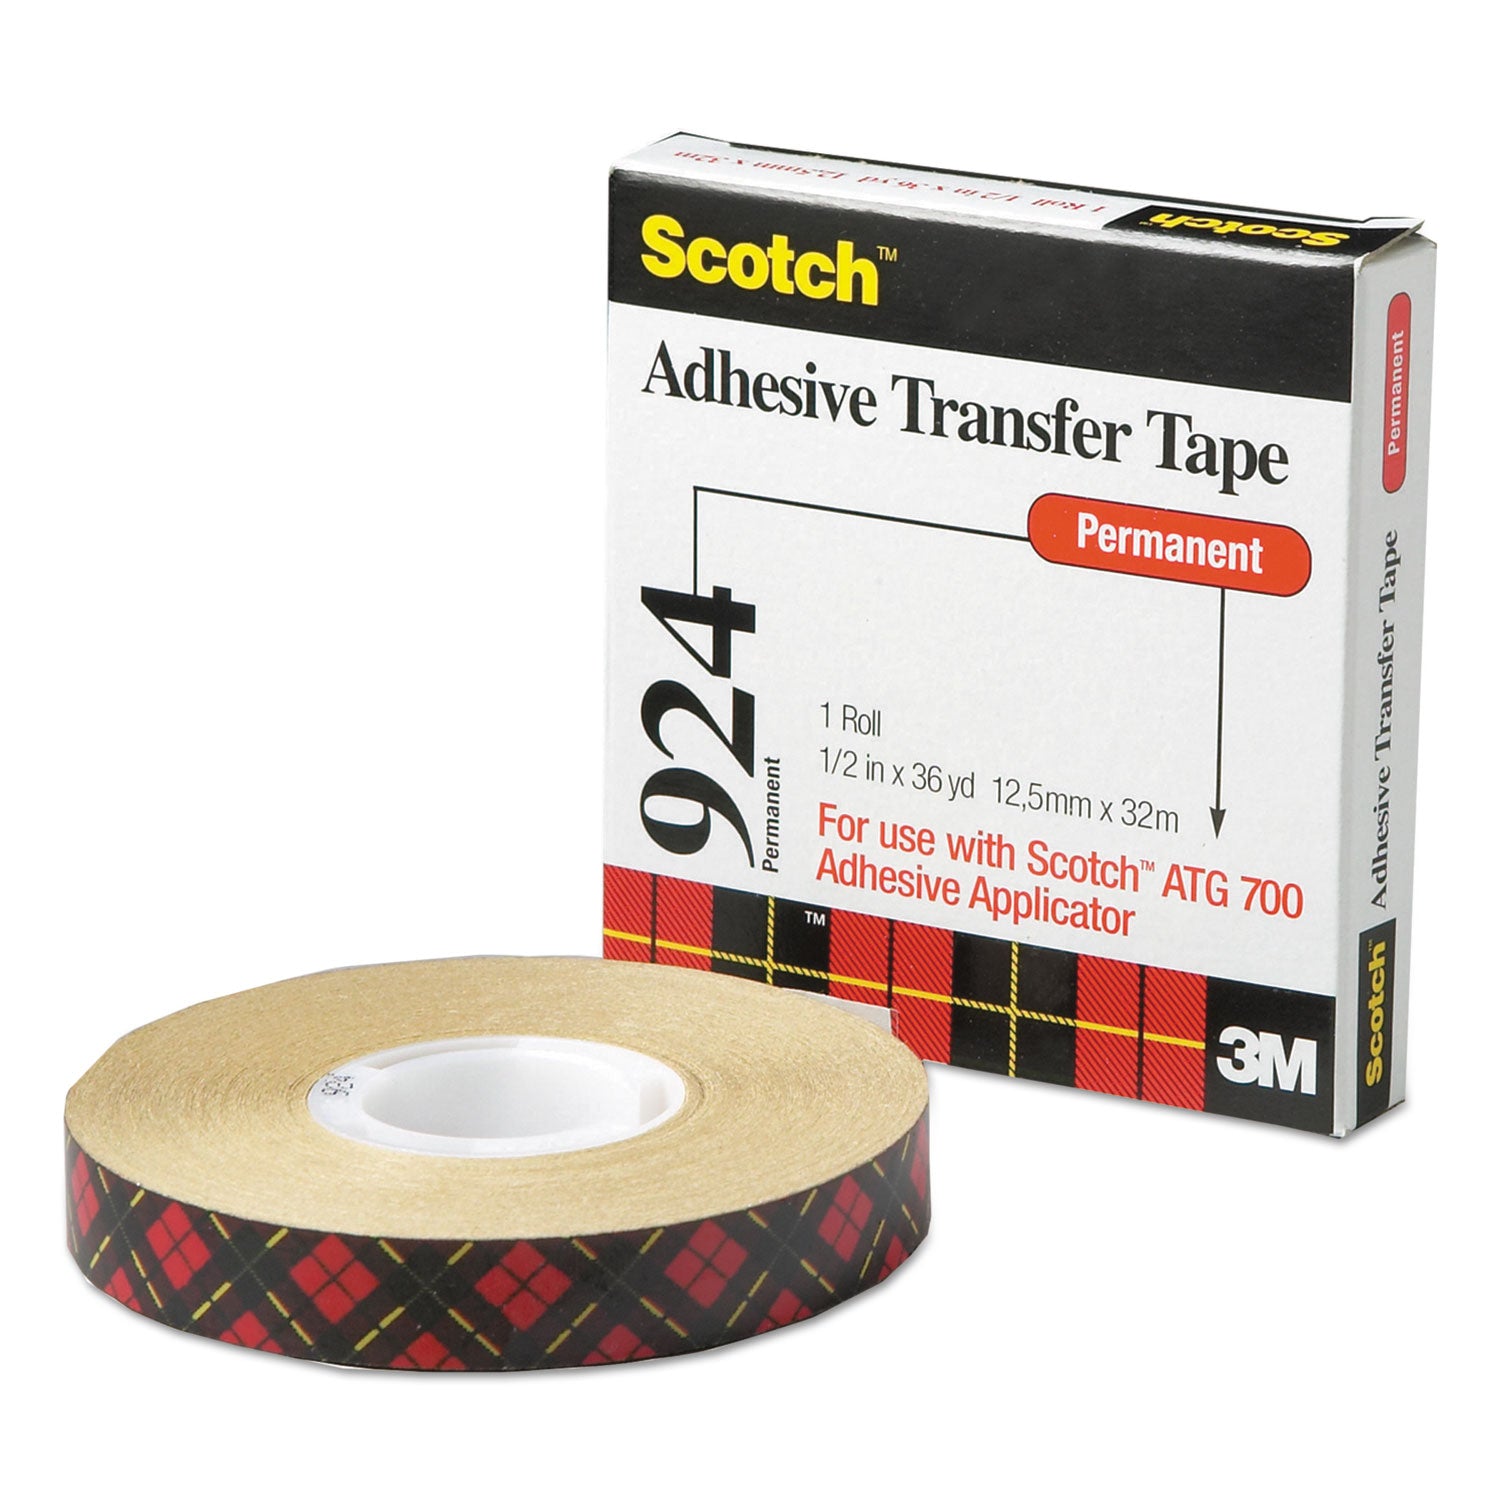 ATG Adhesive Transfer Tape, Permanent, Holds Up to 0.5 lbs, 0.5" x 36 yds, Clear - 